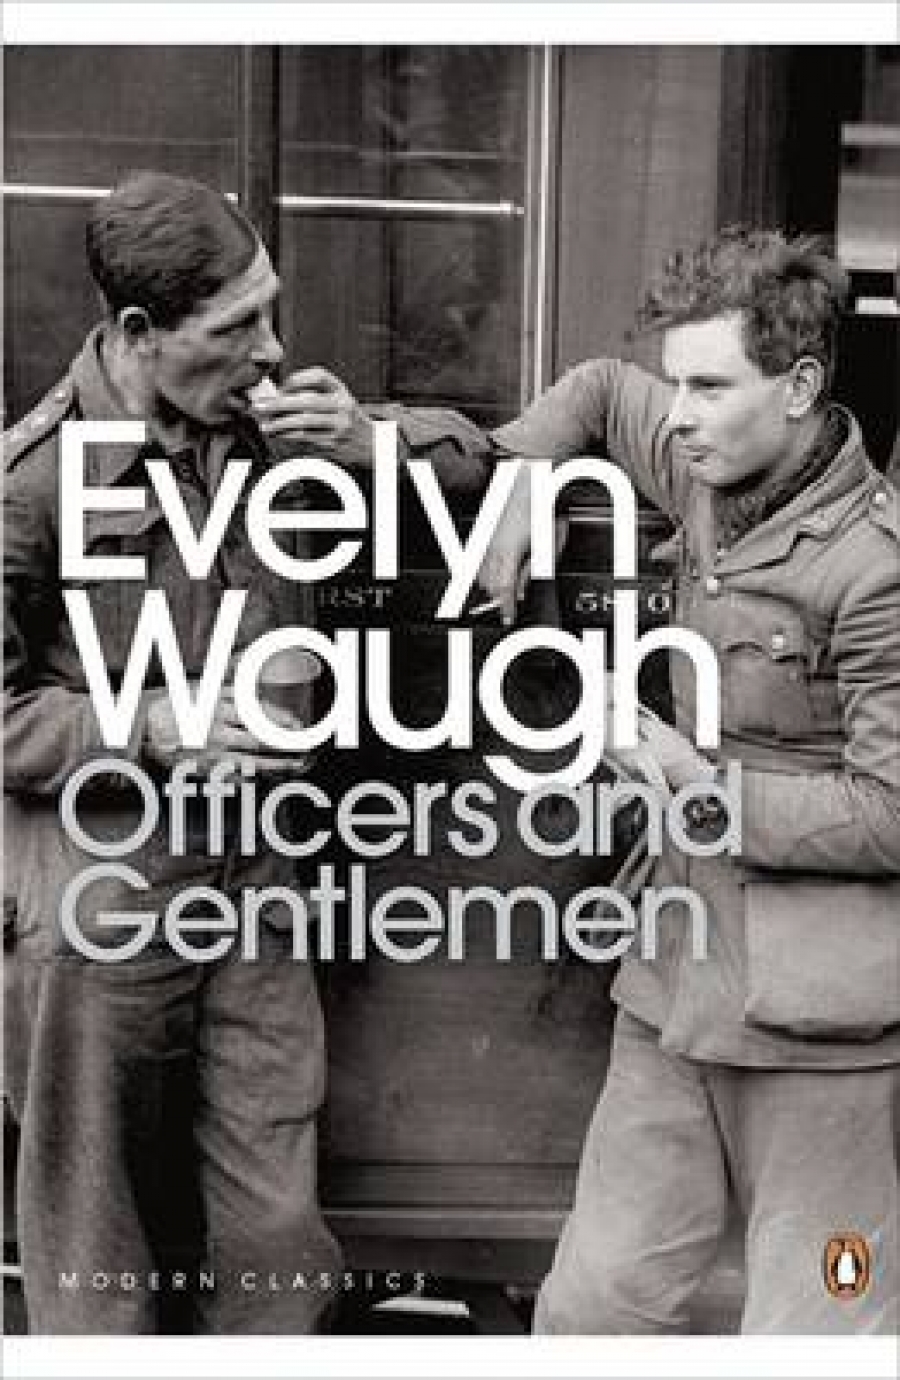 Waugh, Evelyn Officers and Gentlemen 